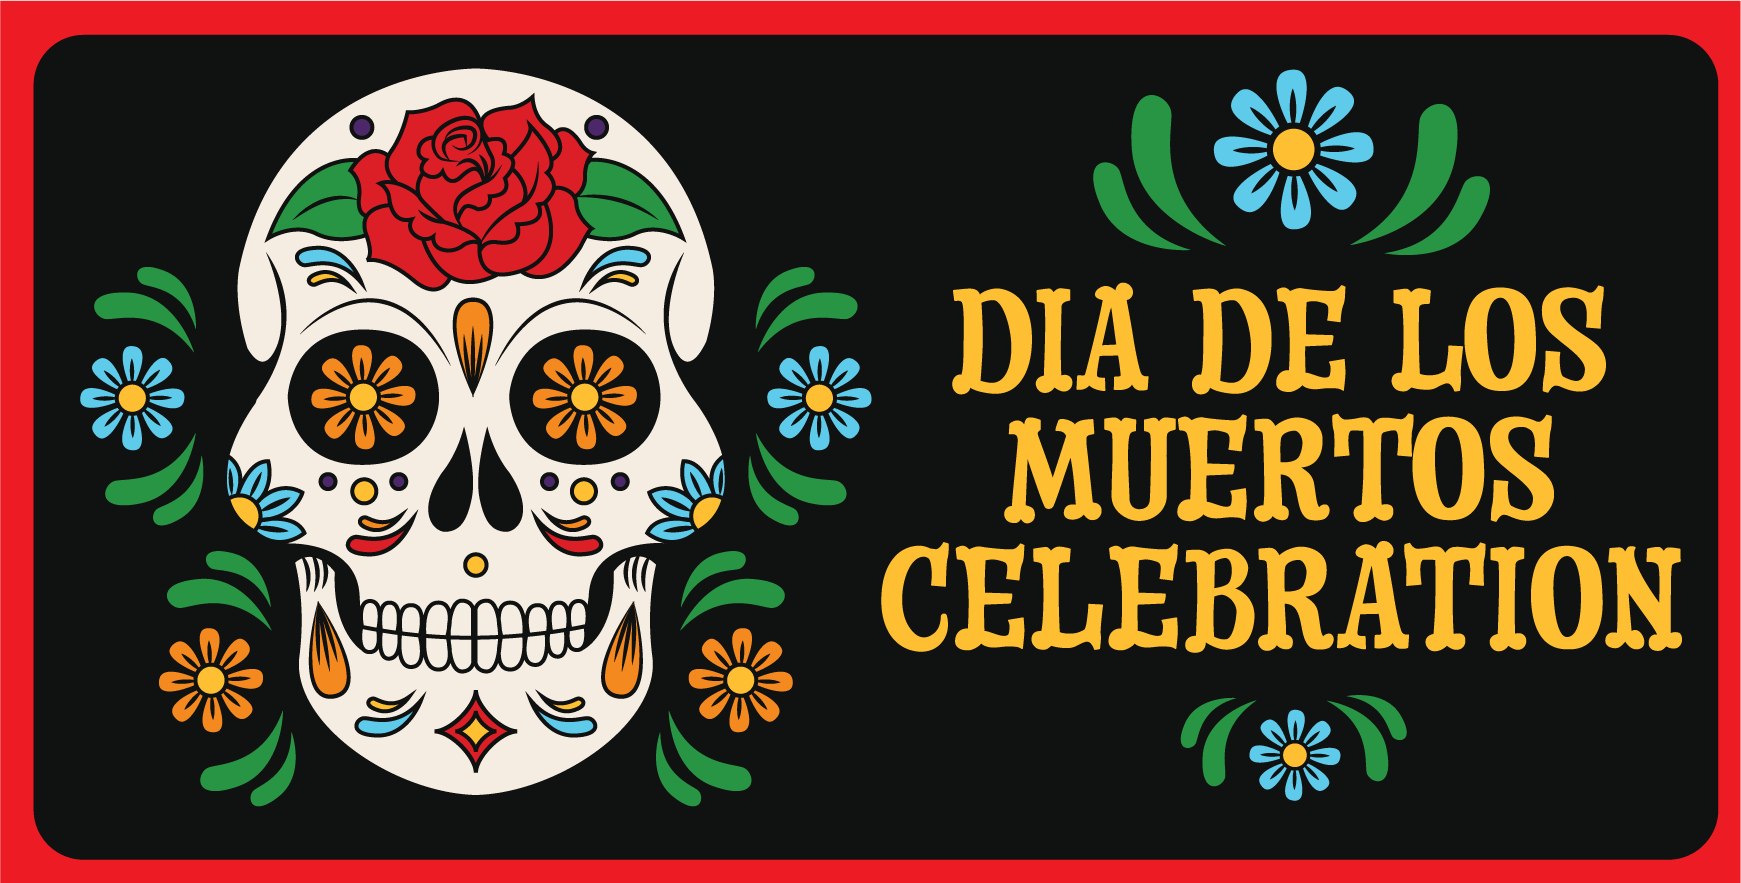 Dia de los Muertos Celebrations in yellow font against a black background with a white skull that has a red flower on its forehead on the left hand side. The rest of the skull is painted with other blue and orange flowers and markings.